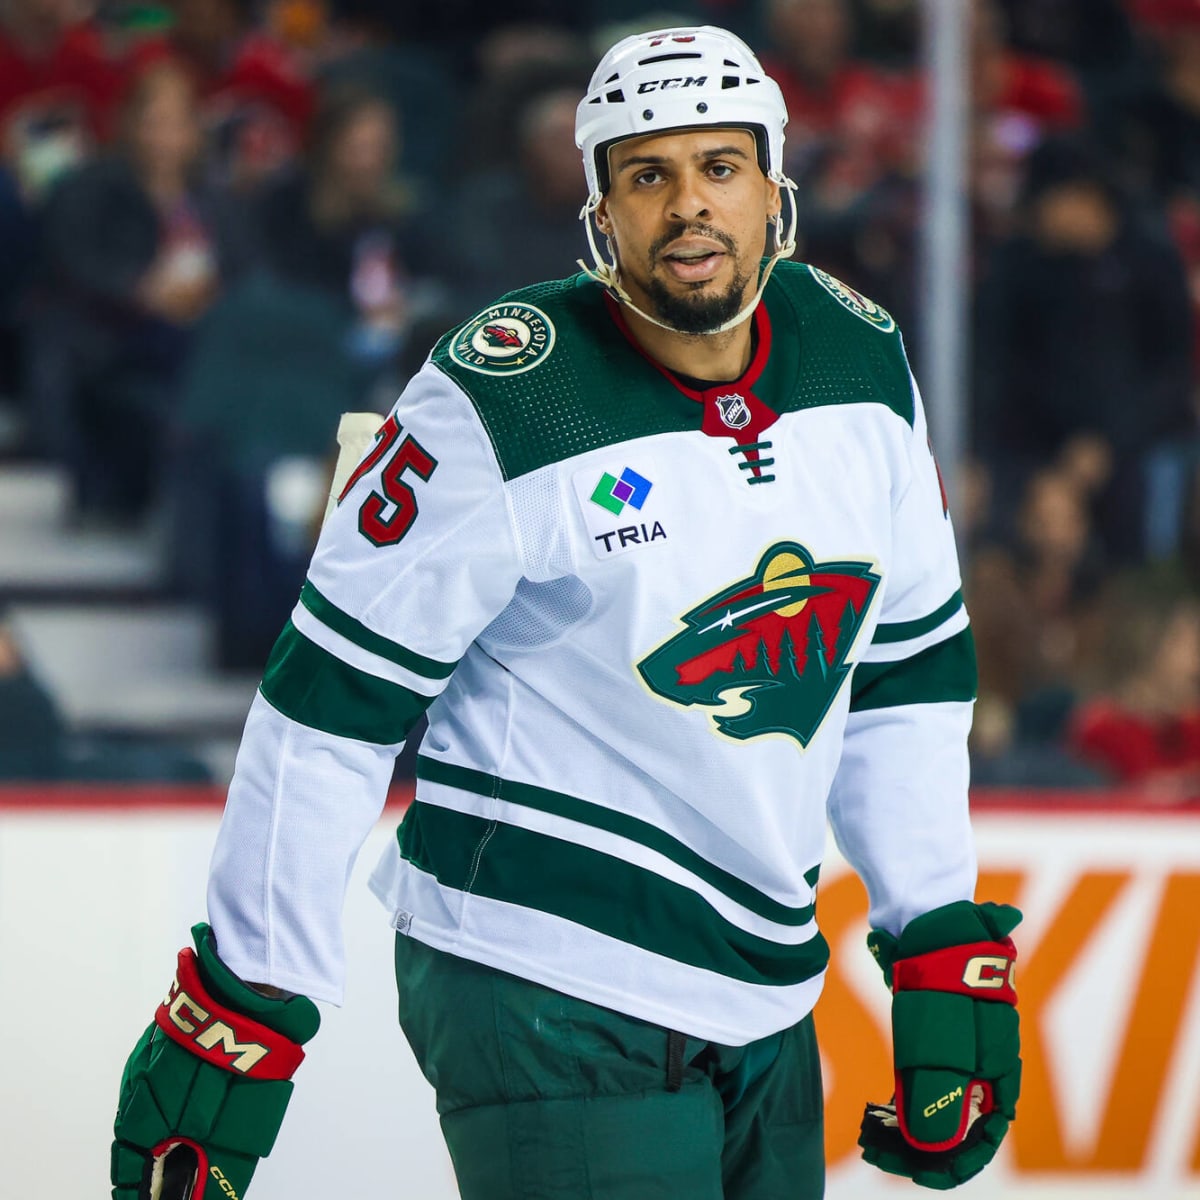 How an 8-year-old helped turn Wild winger Ryan Reaves into a